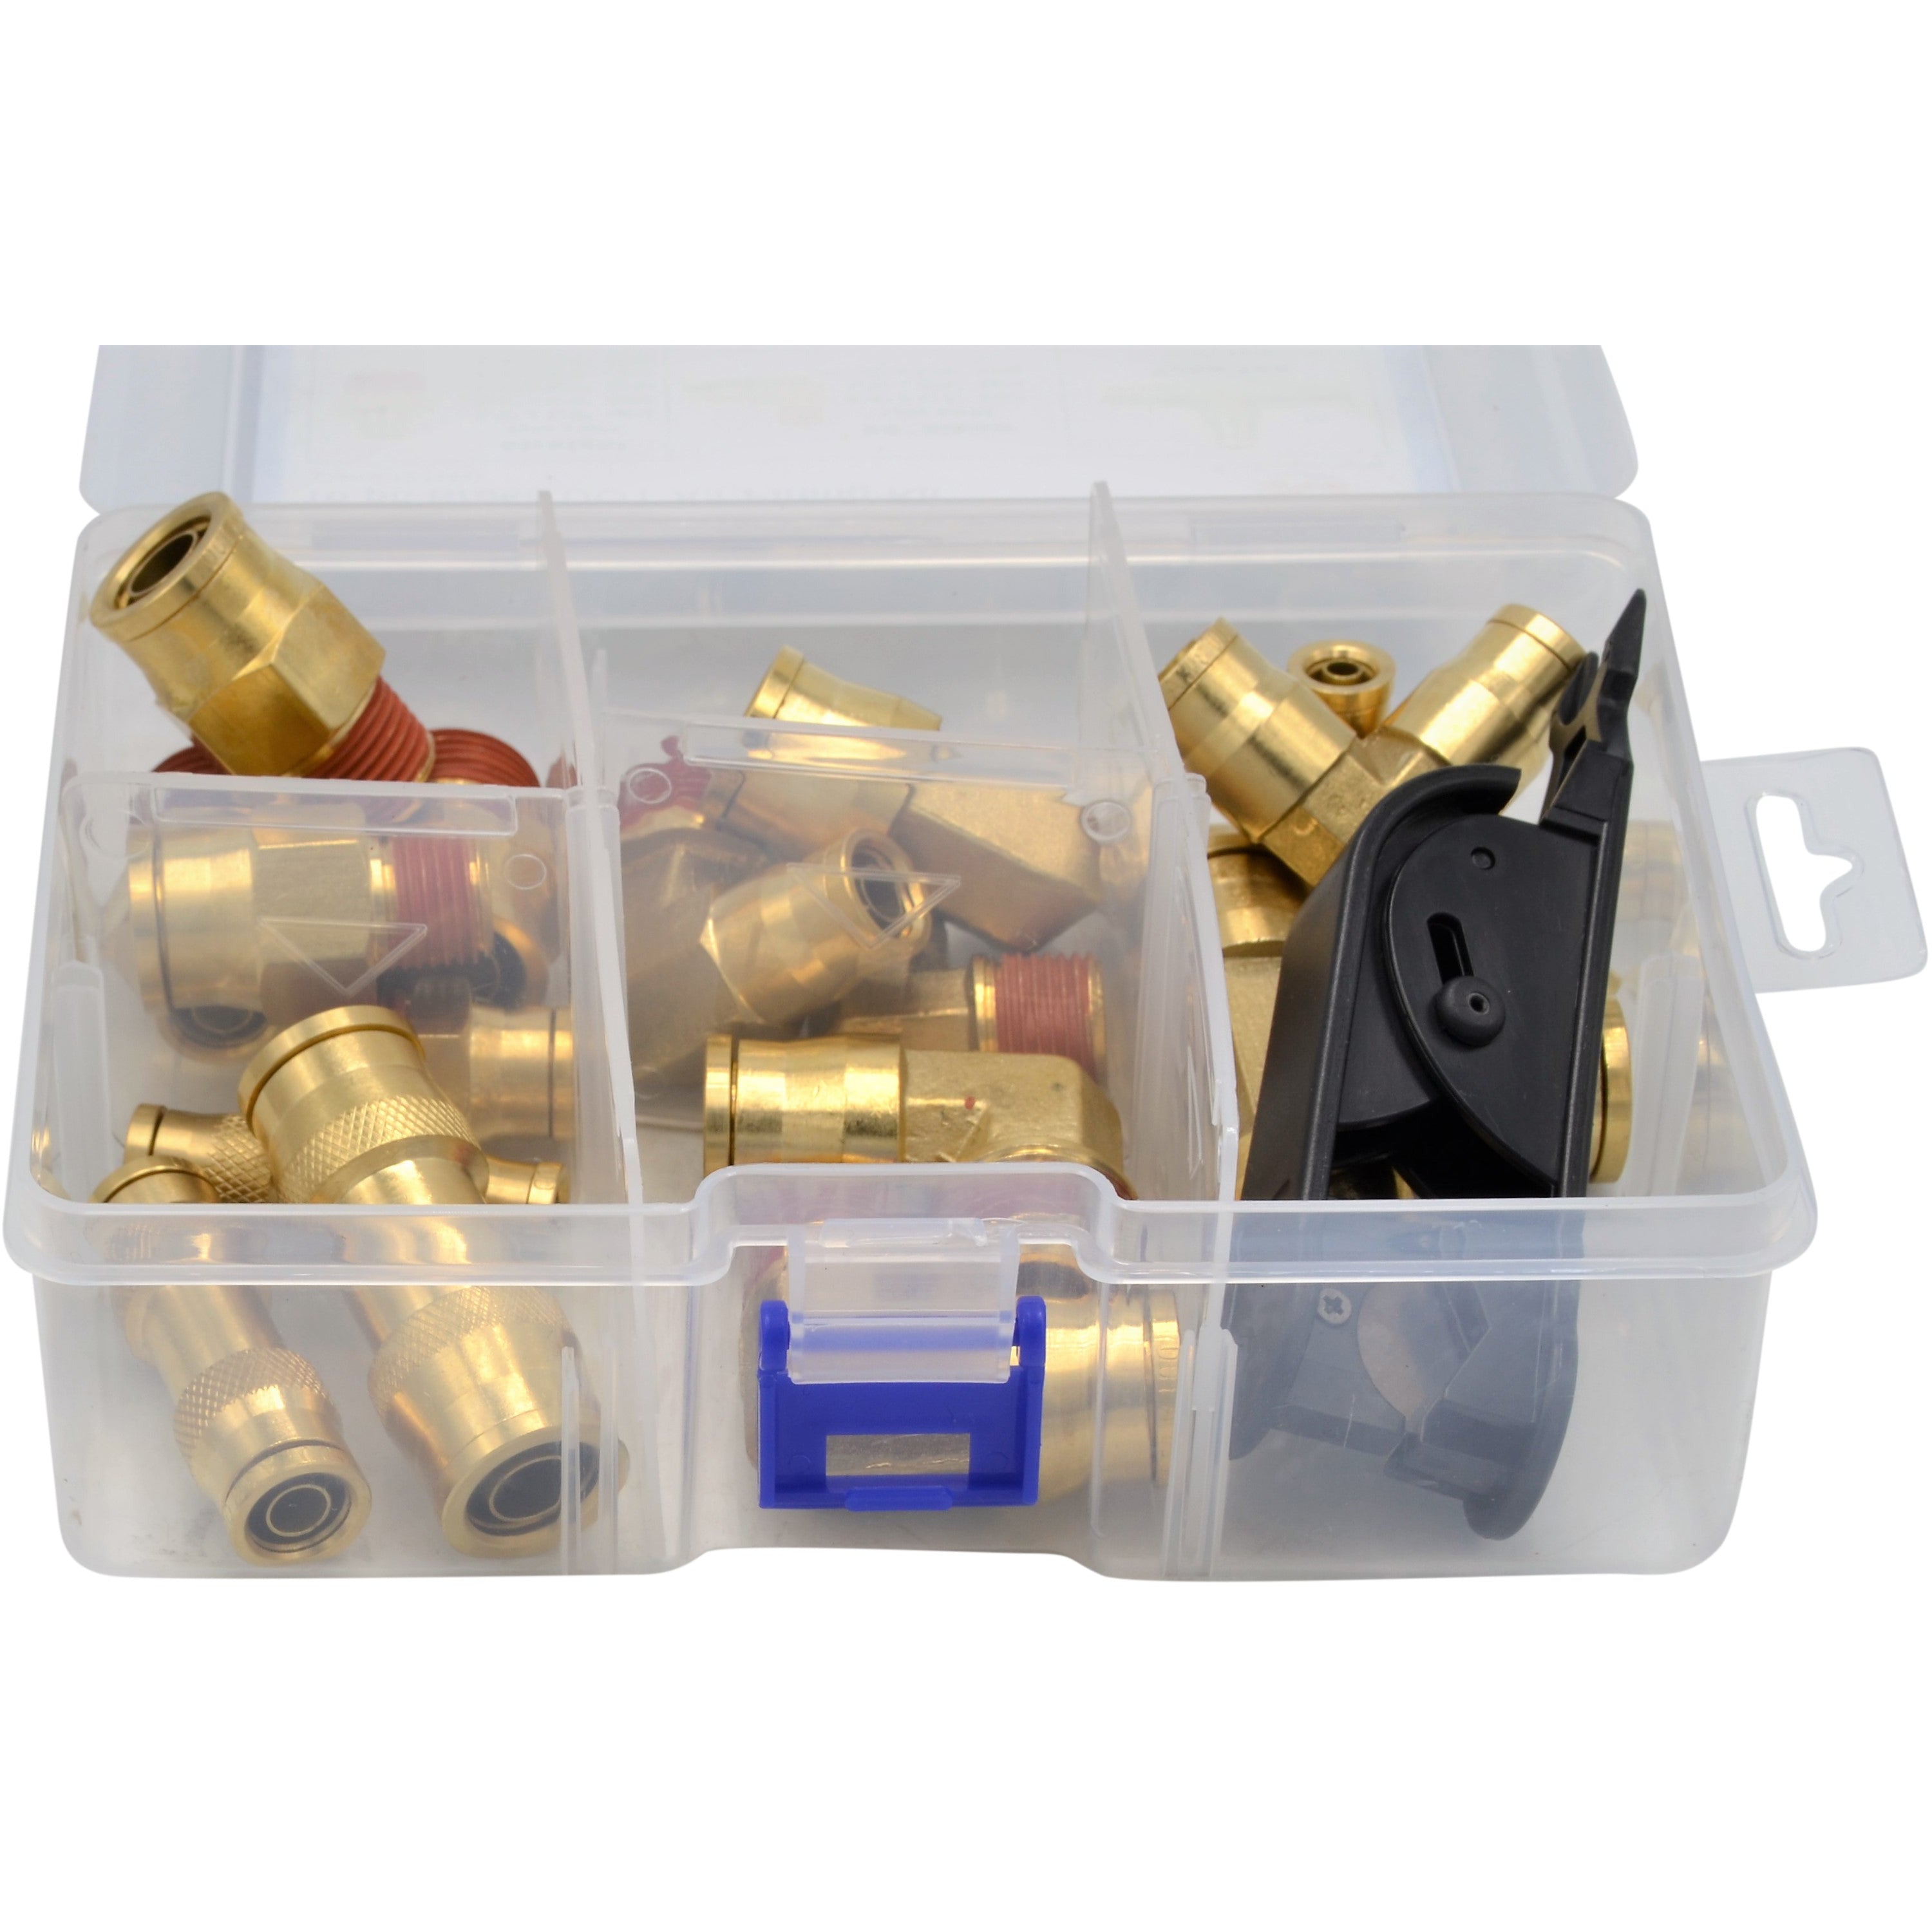 16 Piece DOT Brass Push in Hose Connect Grab Kit Assortment